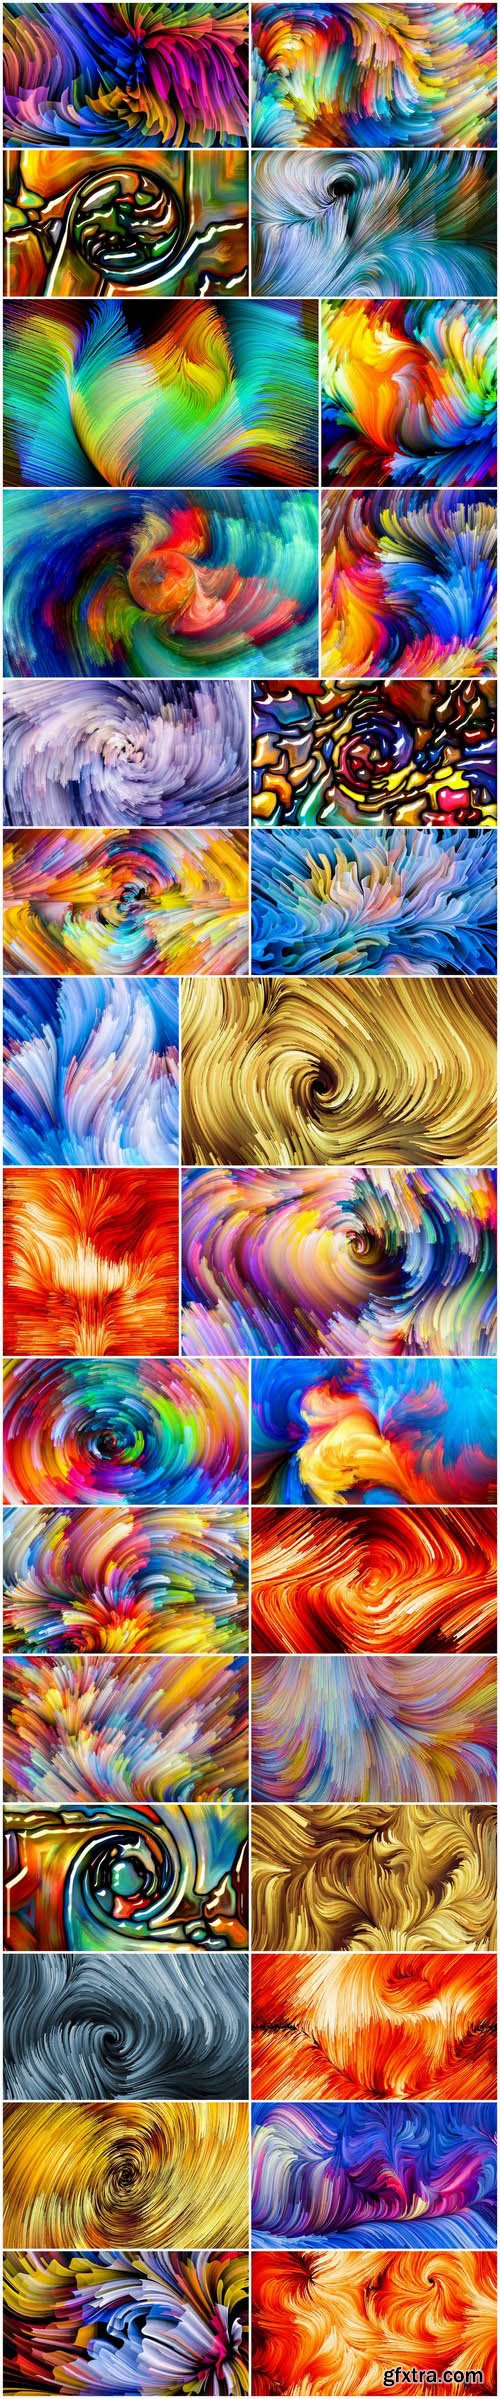 Exploding Color and Abstract Backgrounds - Set of 30xUHQ JPEG Professional Stock Images